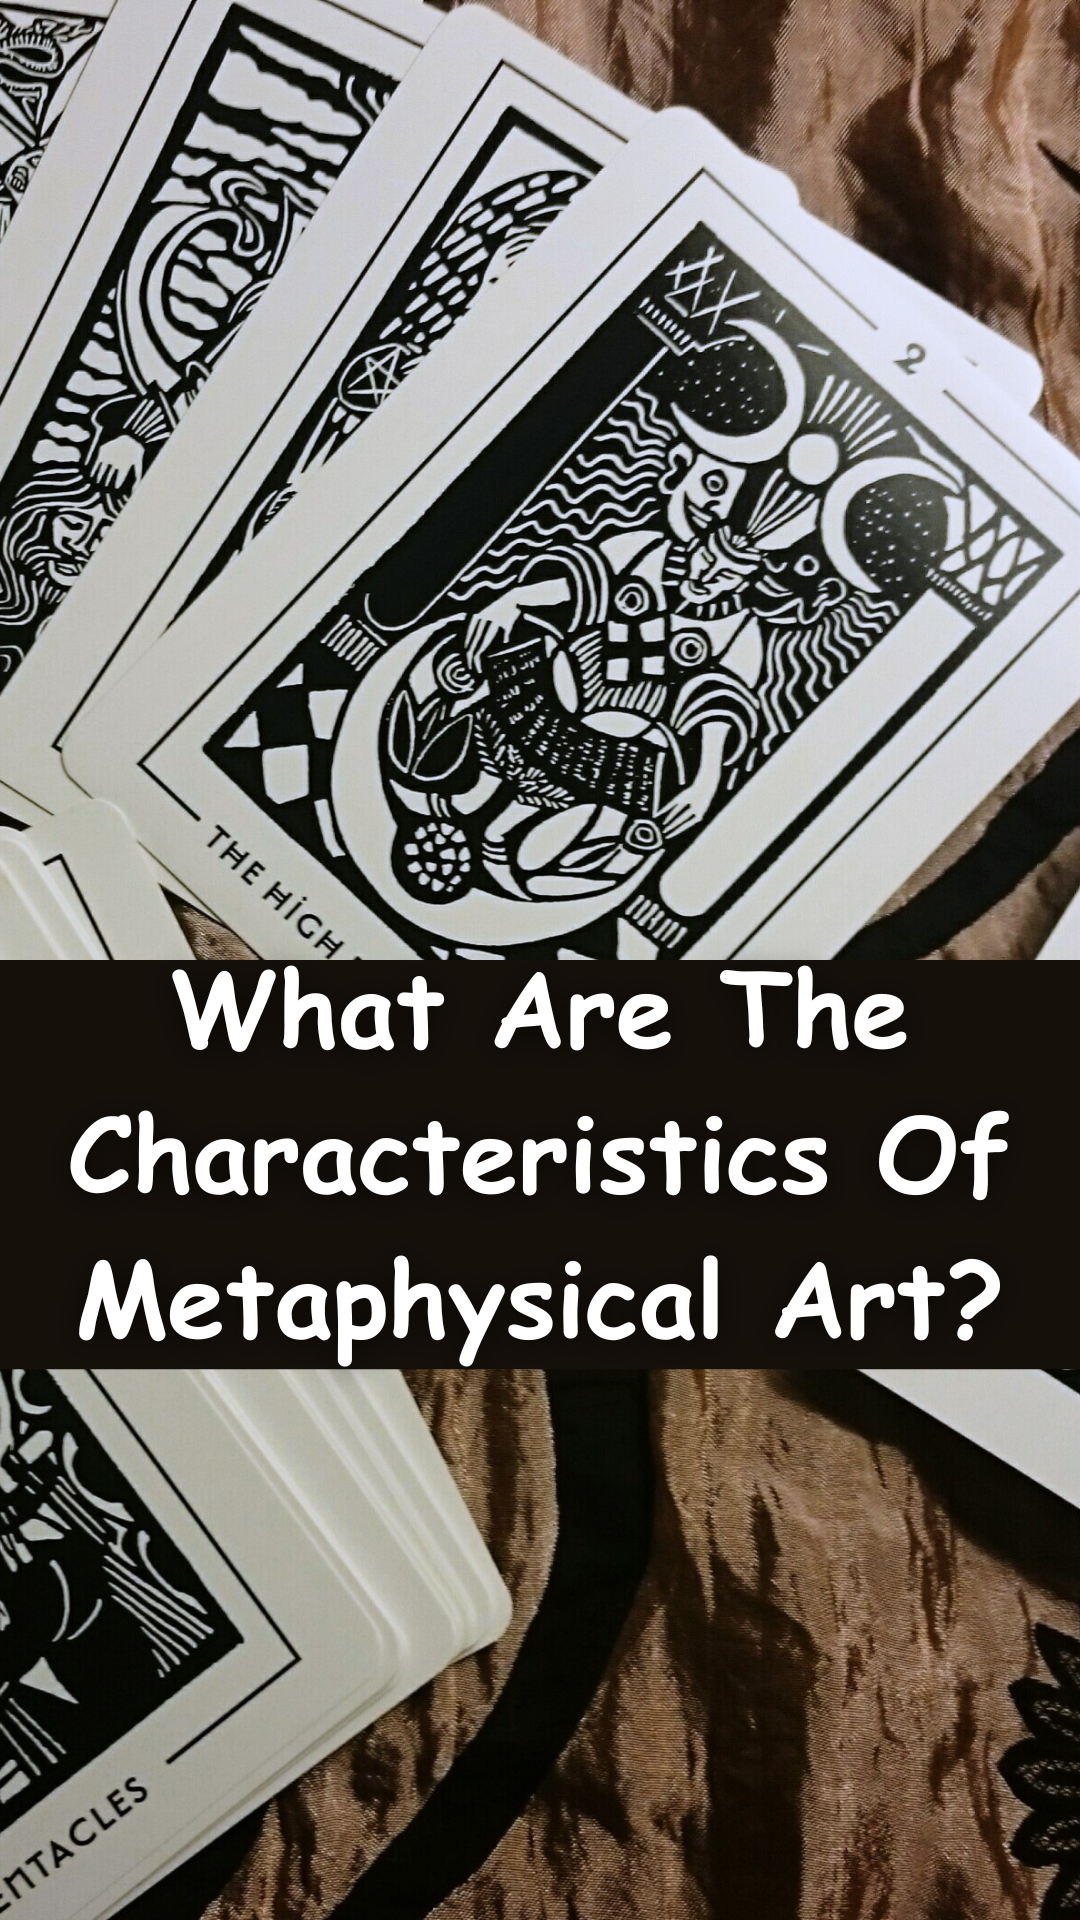 What Are The Characteristics Of Metaphysical Art?